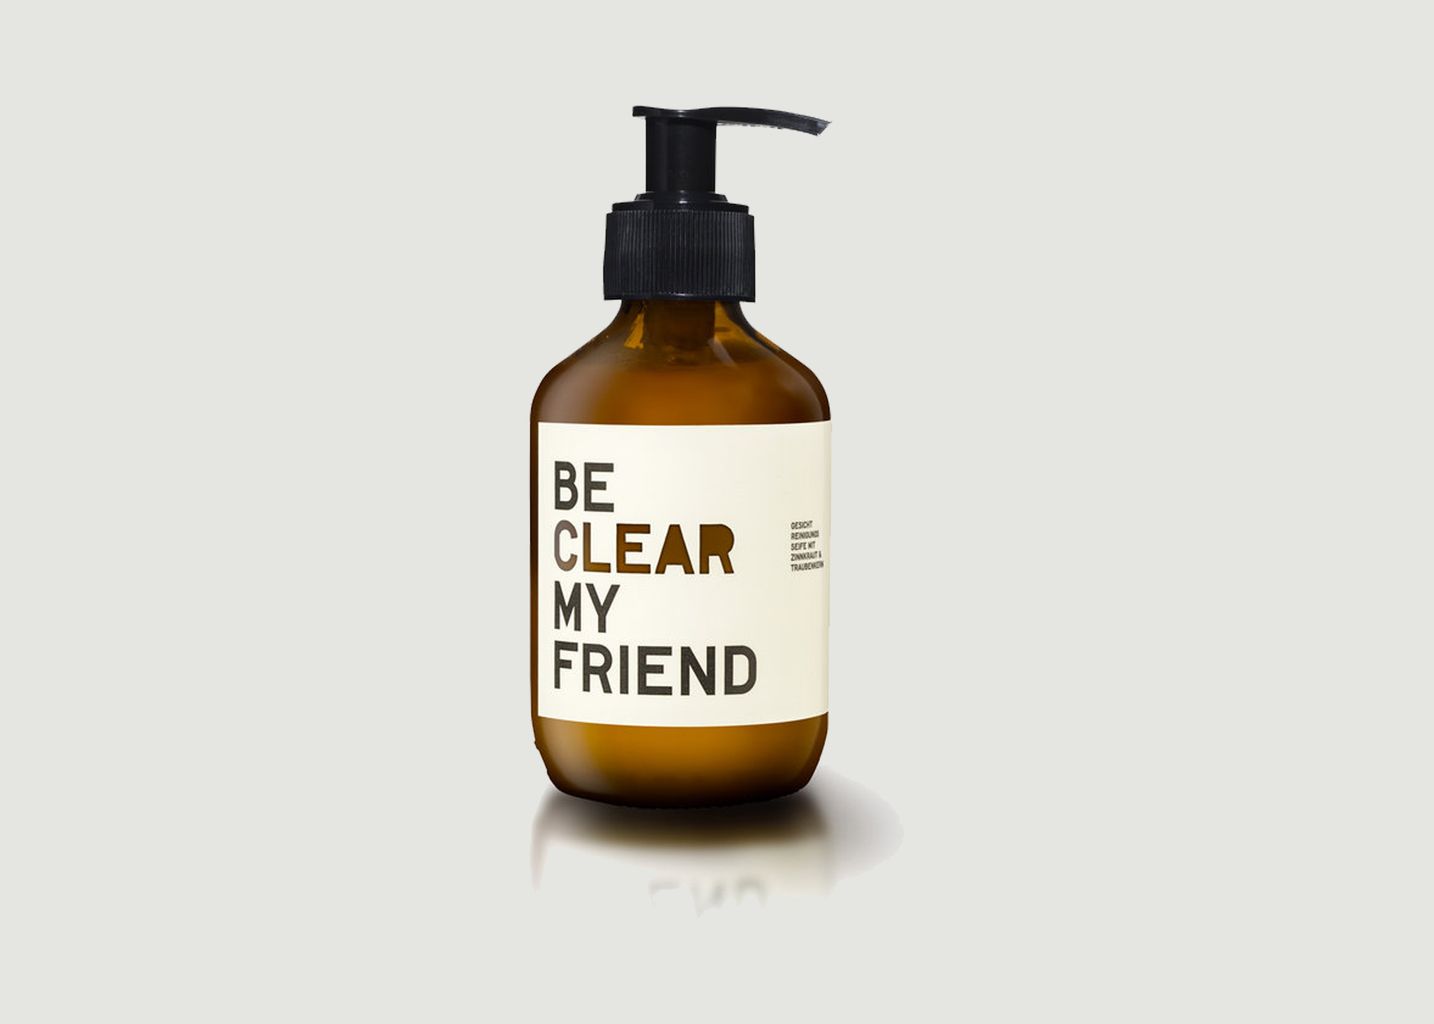 Be Soap Facial Cleanser 100ml. - Be Soap My Friend